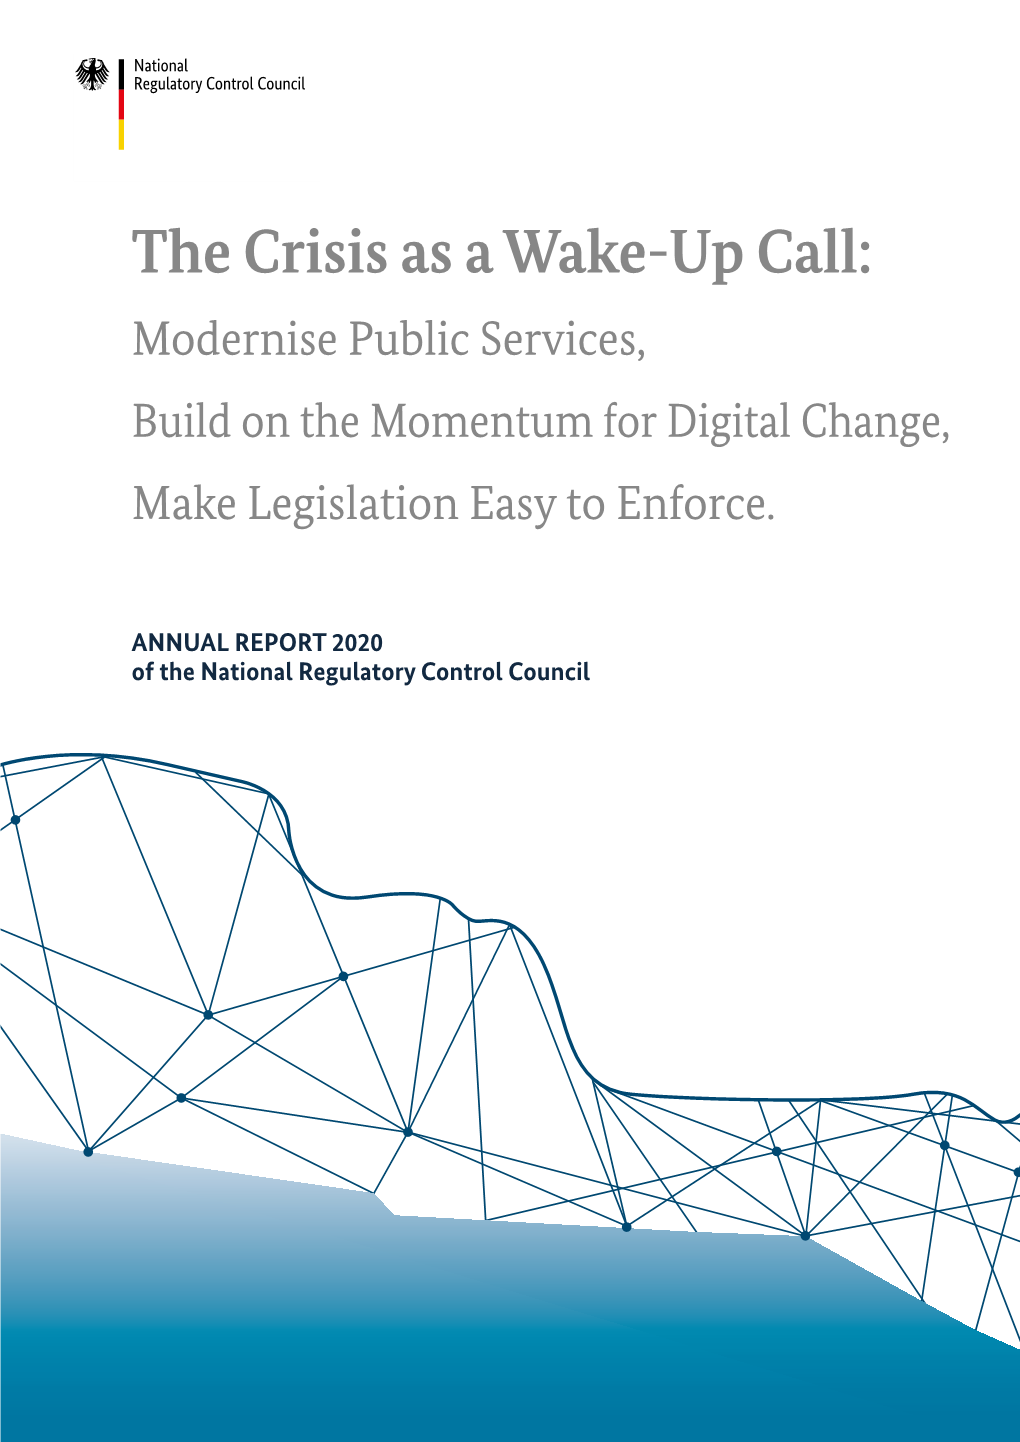 The Crisis As a Wake-Up Call: Modernise Public Services, Build on the Momentum for Digital Change, Make Legislation Easy to Enforce